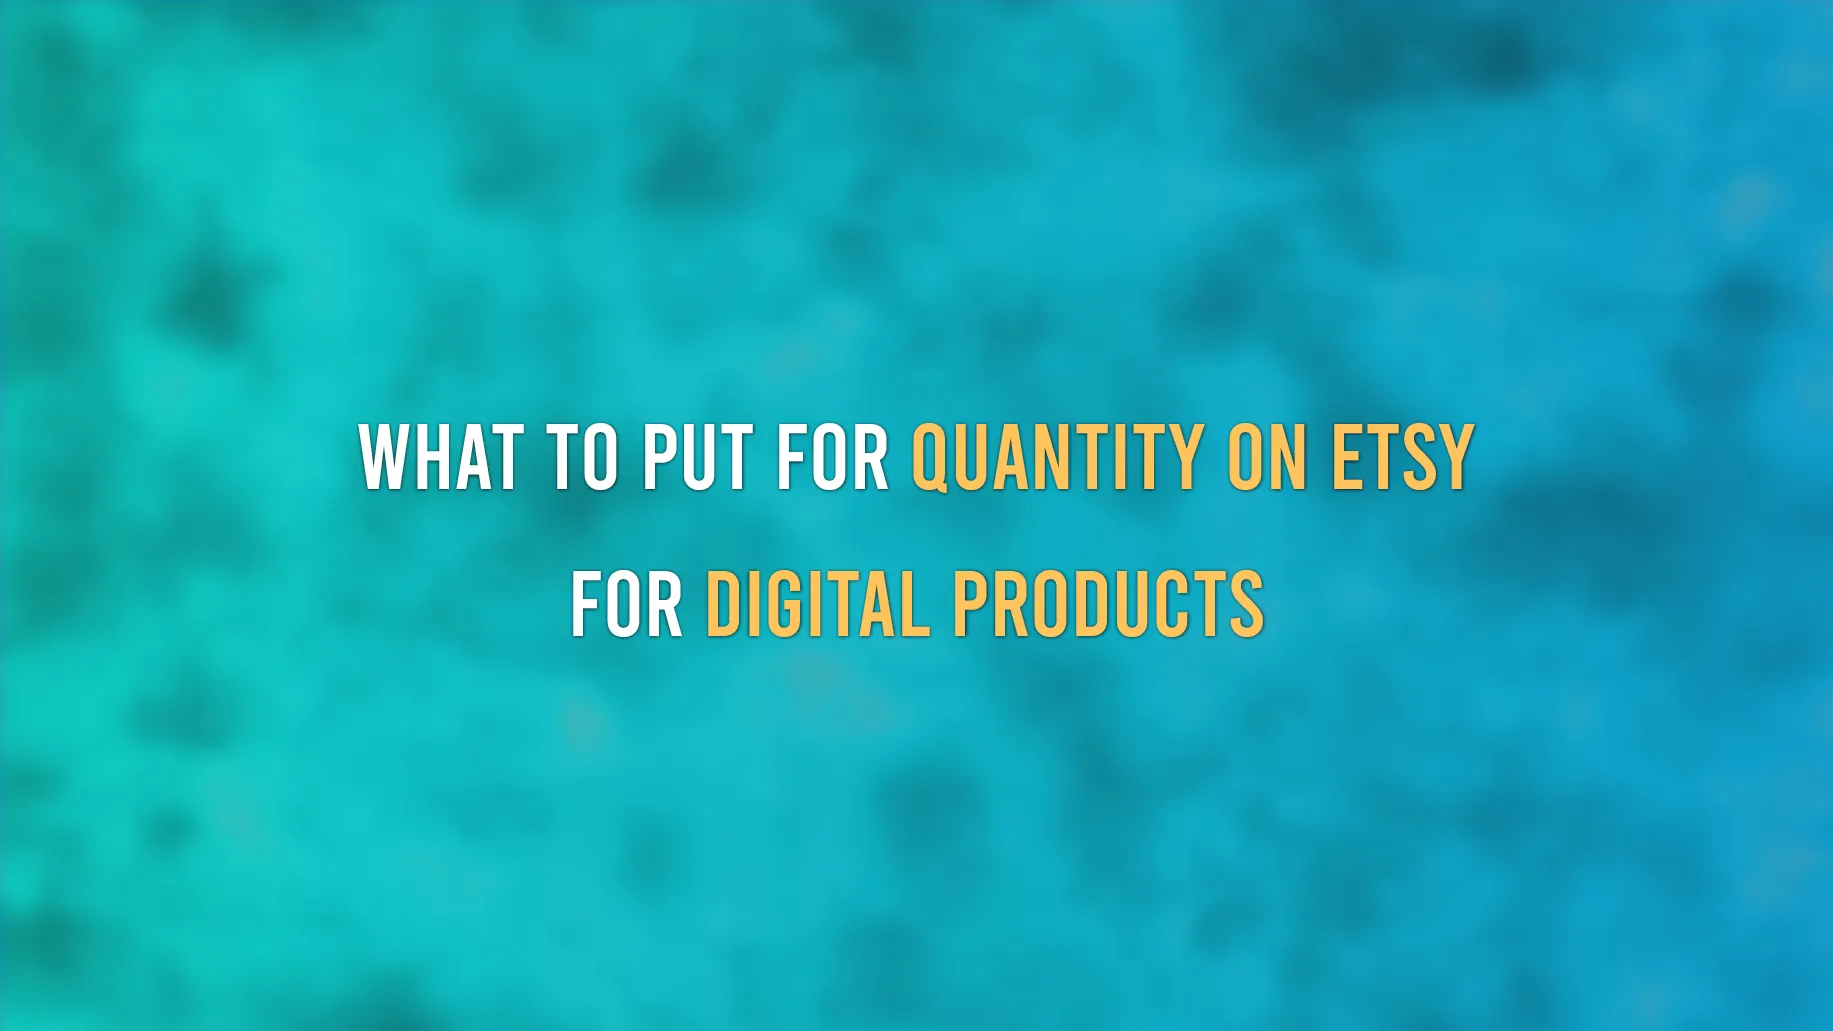 What To Put For Quantity On  For Digital Products: Best Quantity On   (1 - 999)